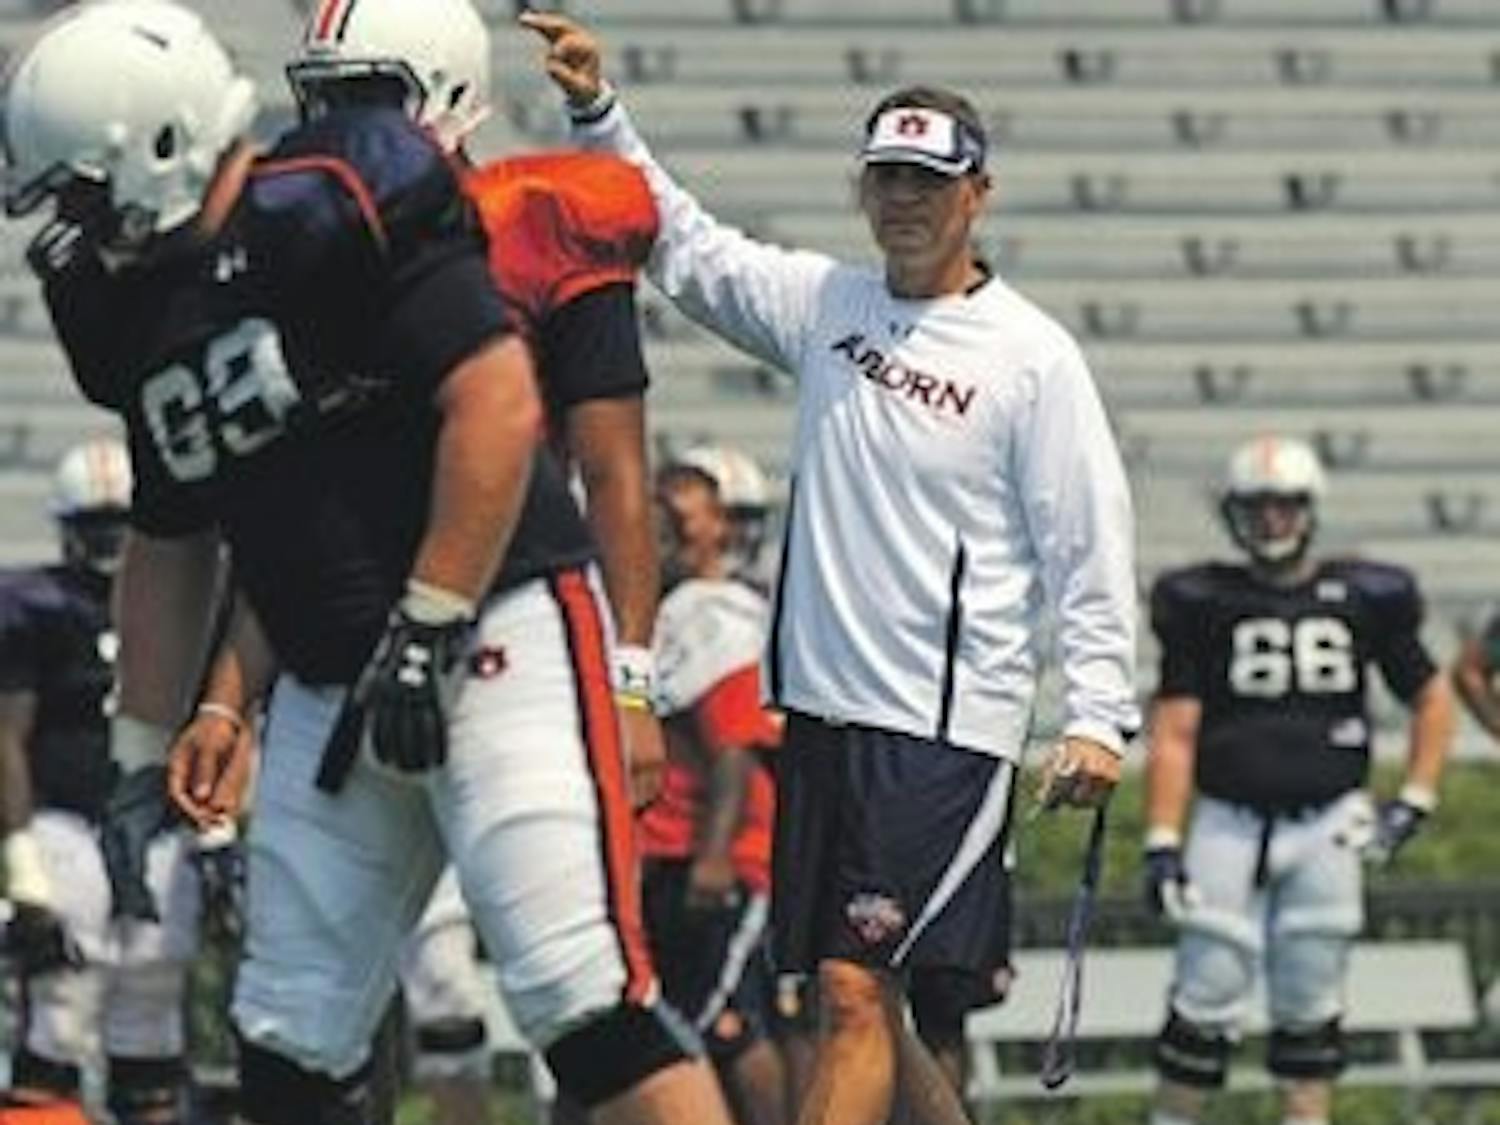 Gene Chizik is in his third year as head coach and has a record
of 42-55 overall. (Courtesy of Todd Van Emst)